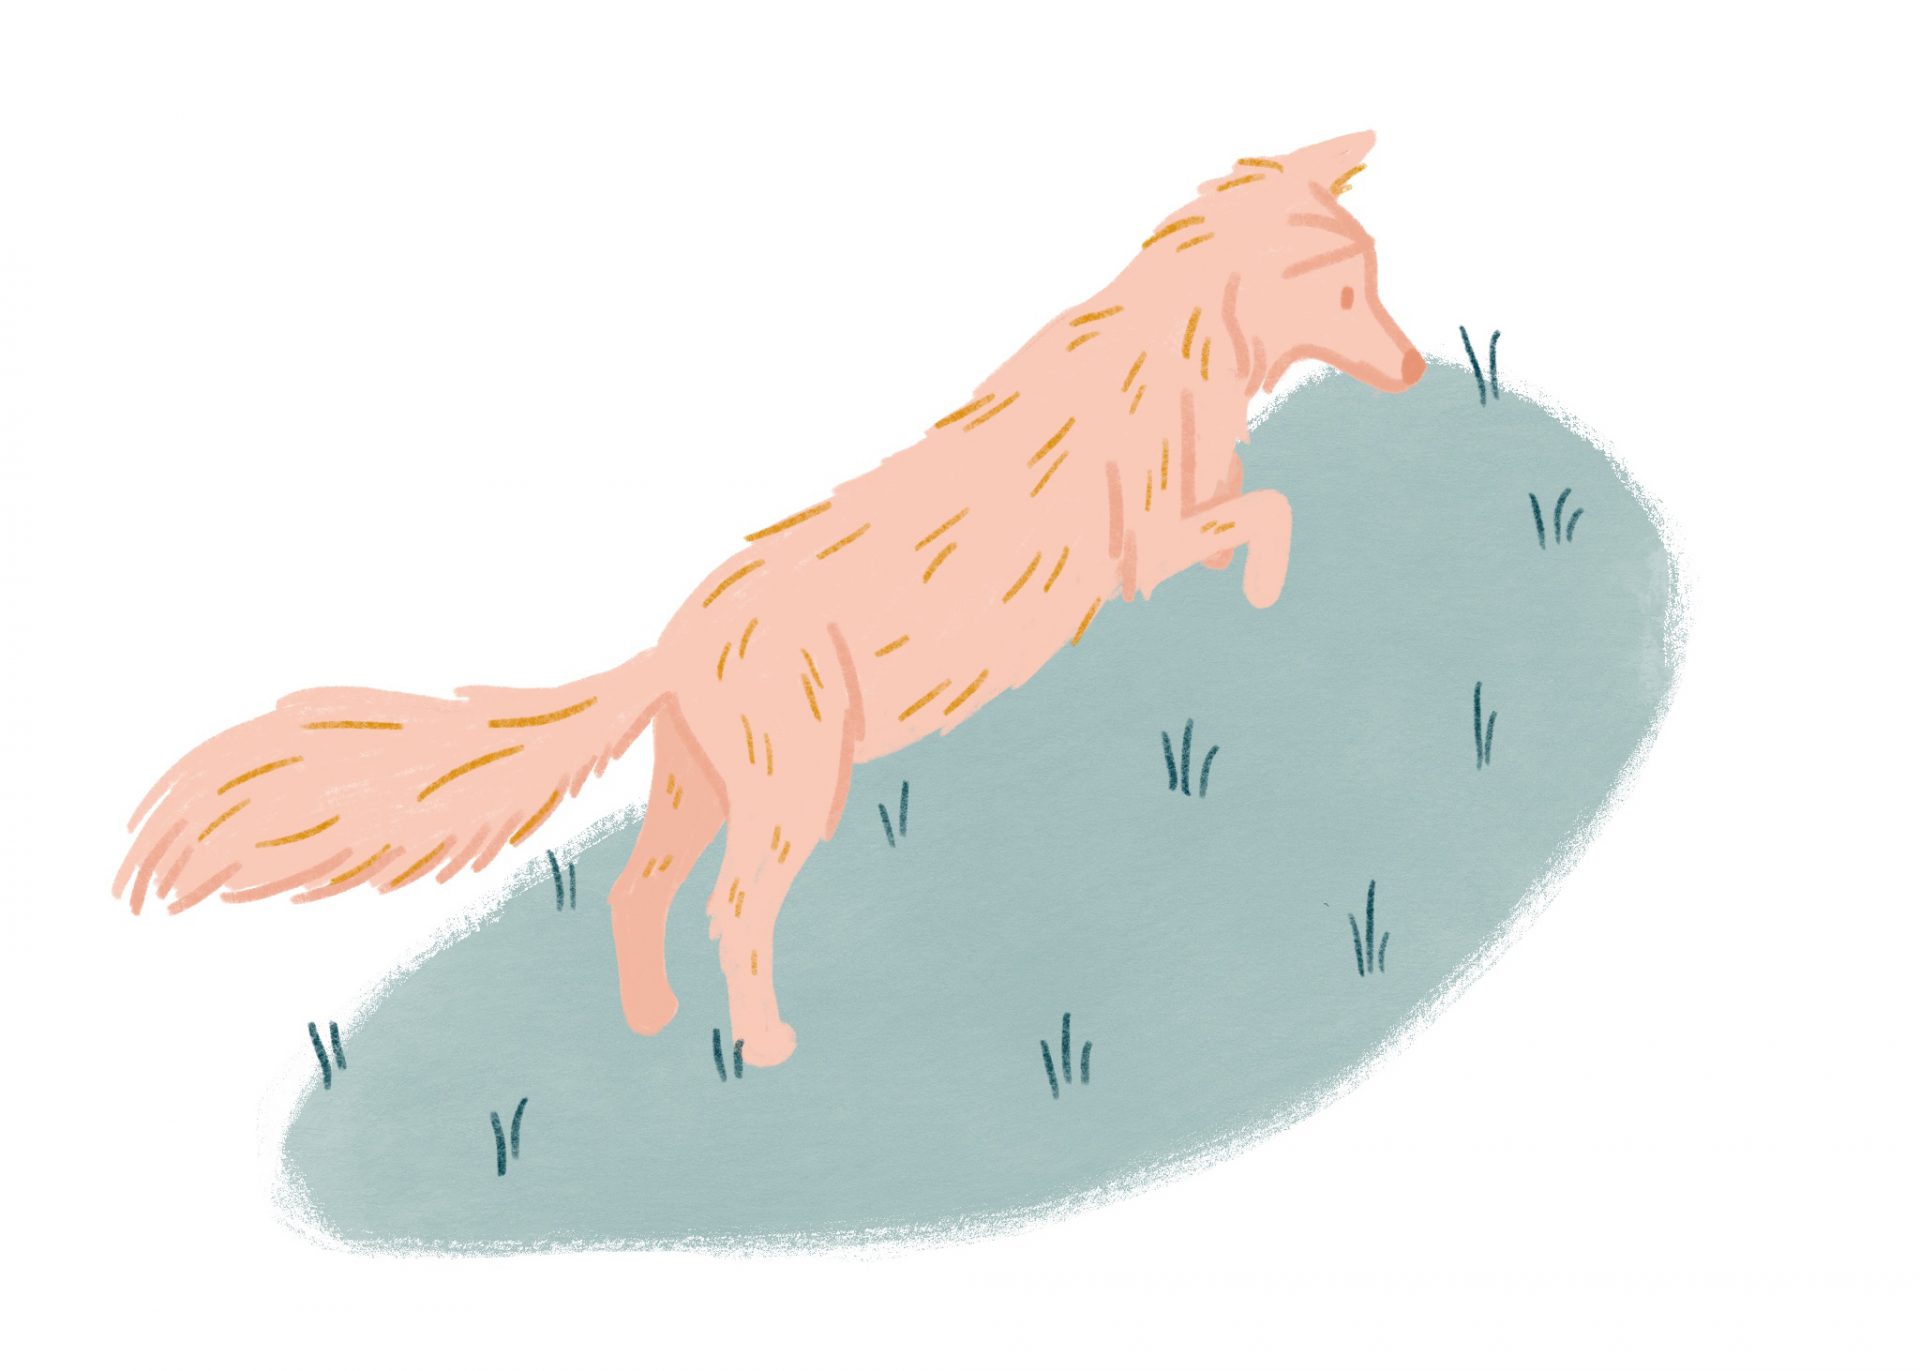 An illustration of a coyote